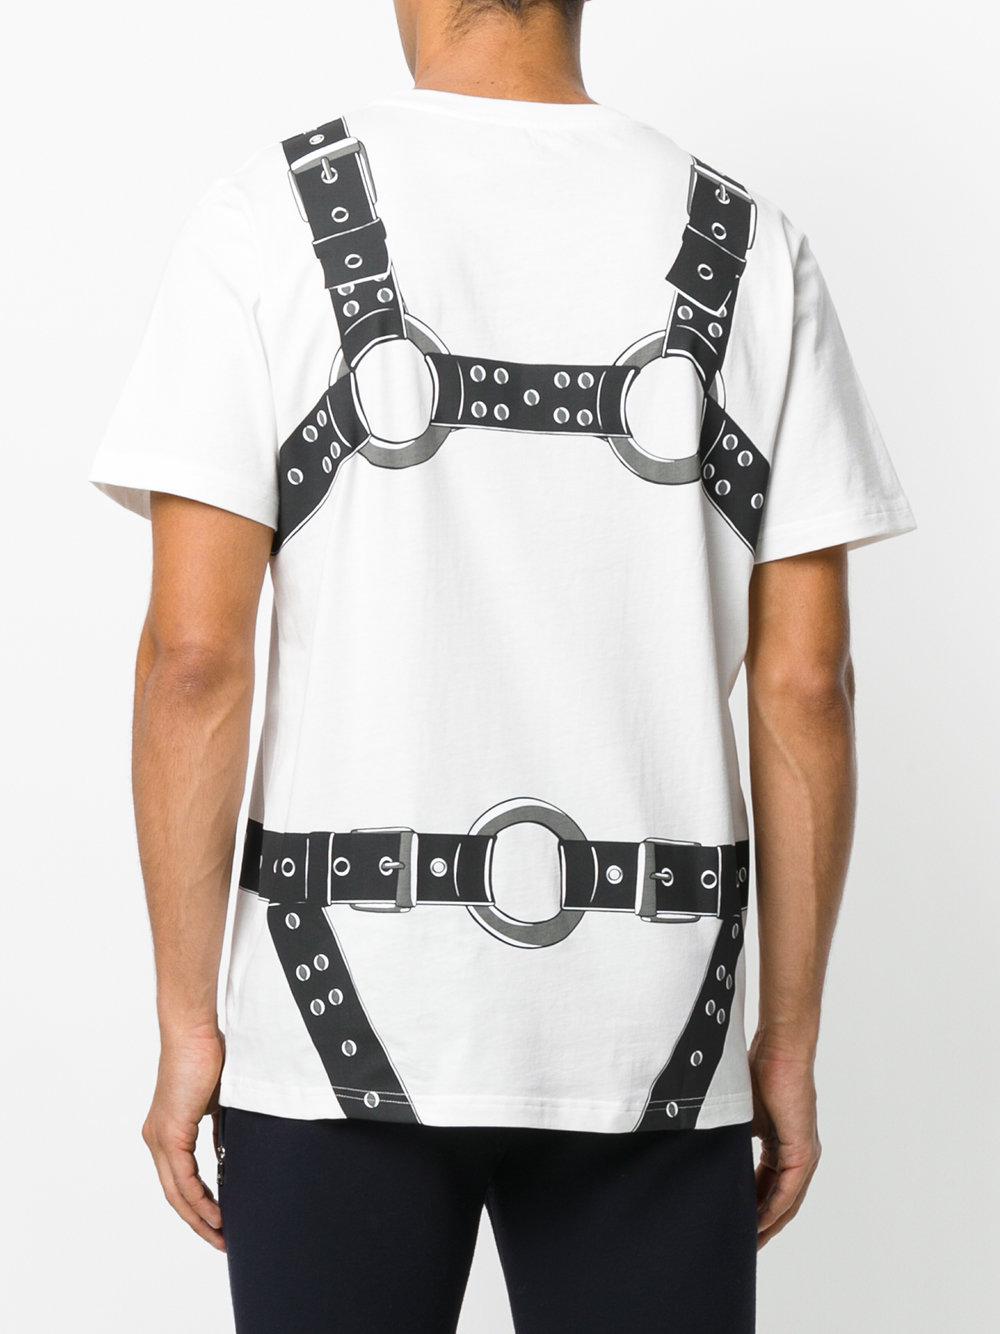 AW17 Moschino Couture Jeremy Scott White T-shirt with Black Harness Print Tee